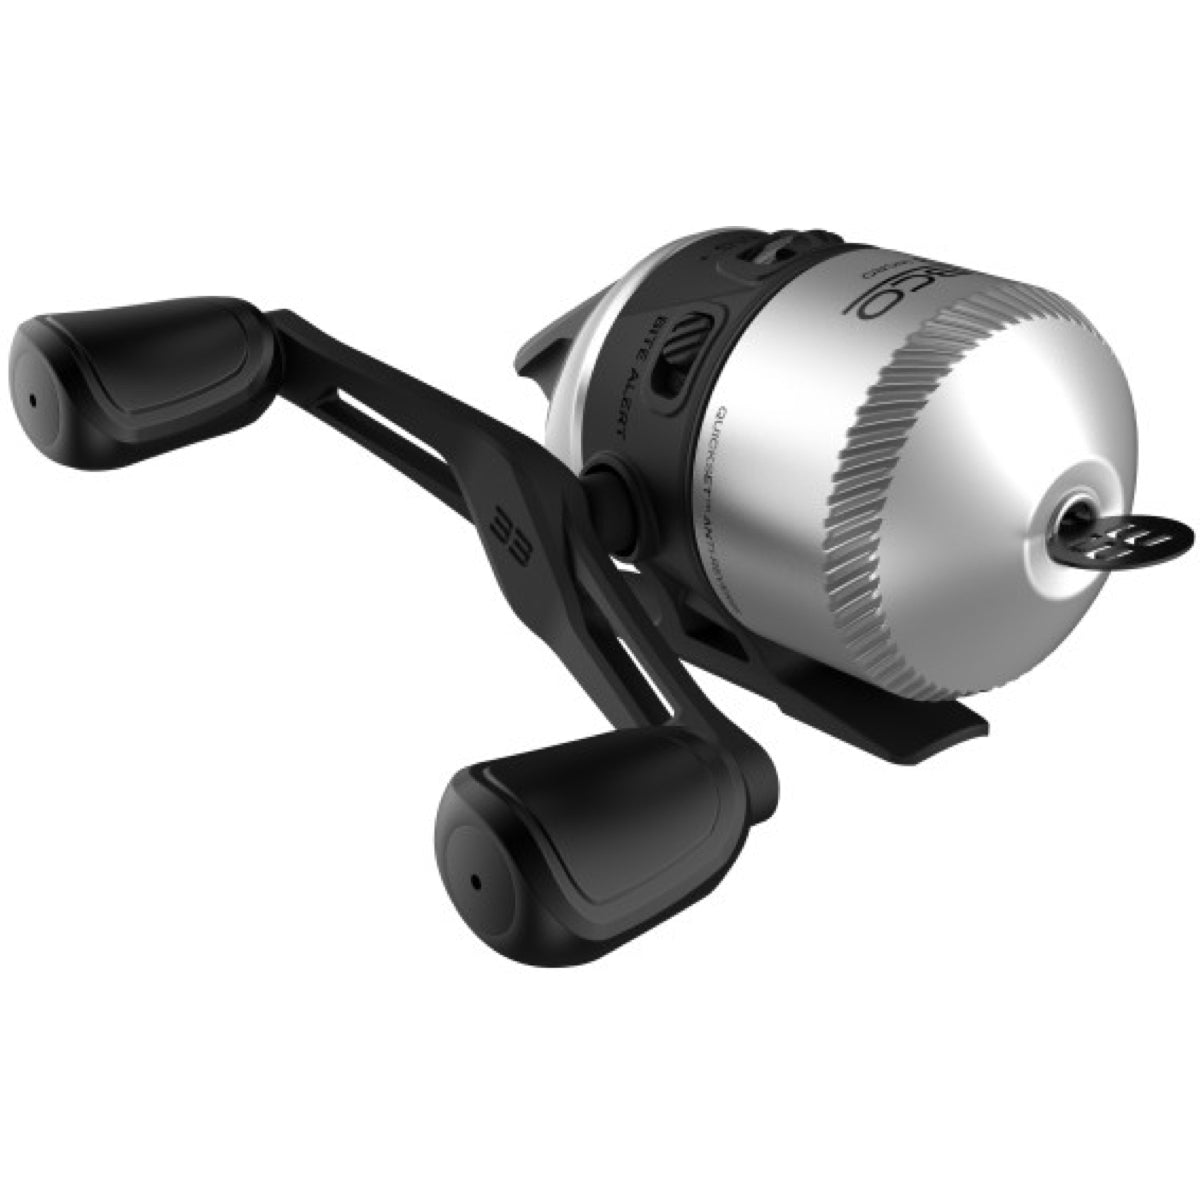 Photo of Zebco Micro Spincast Reel for sale at United Tackle Shops.